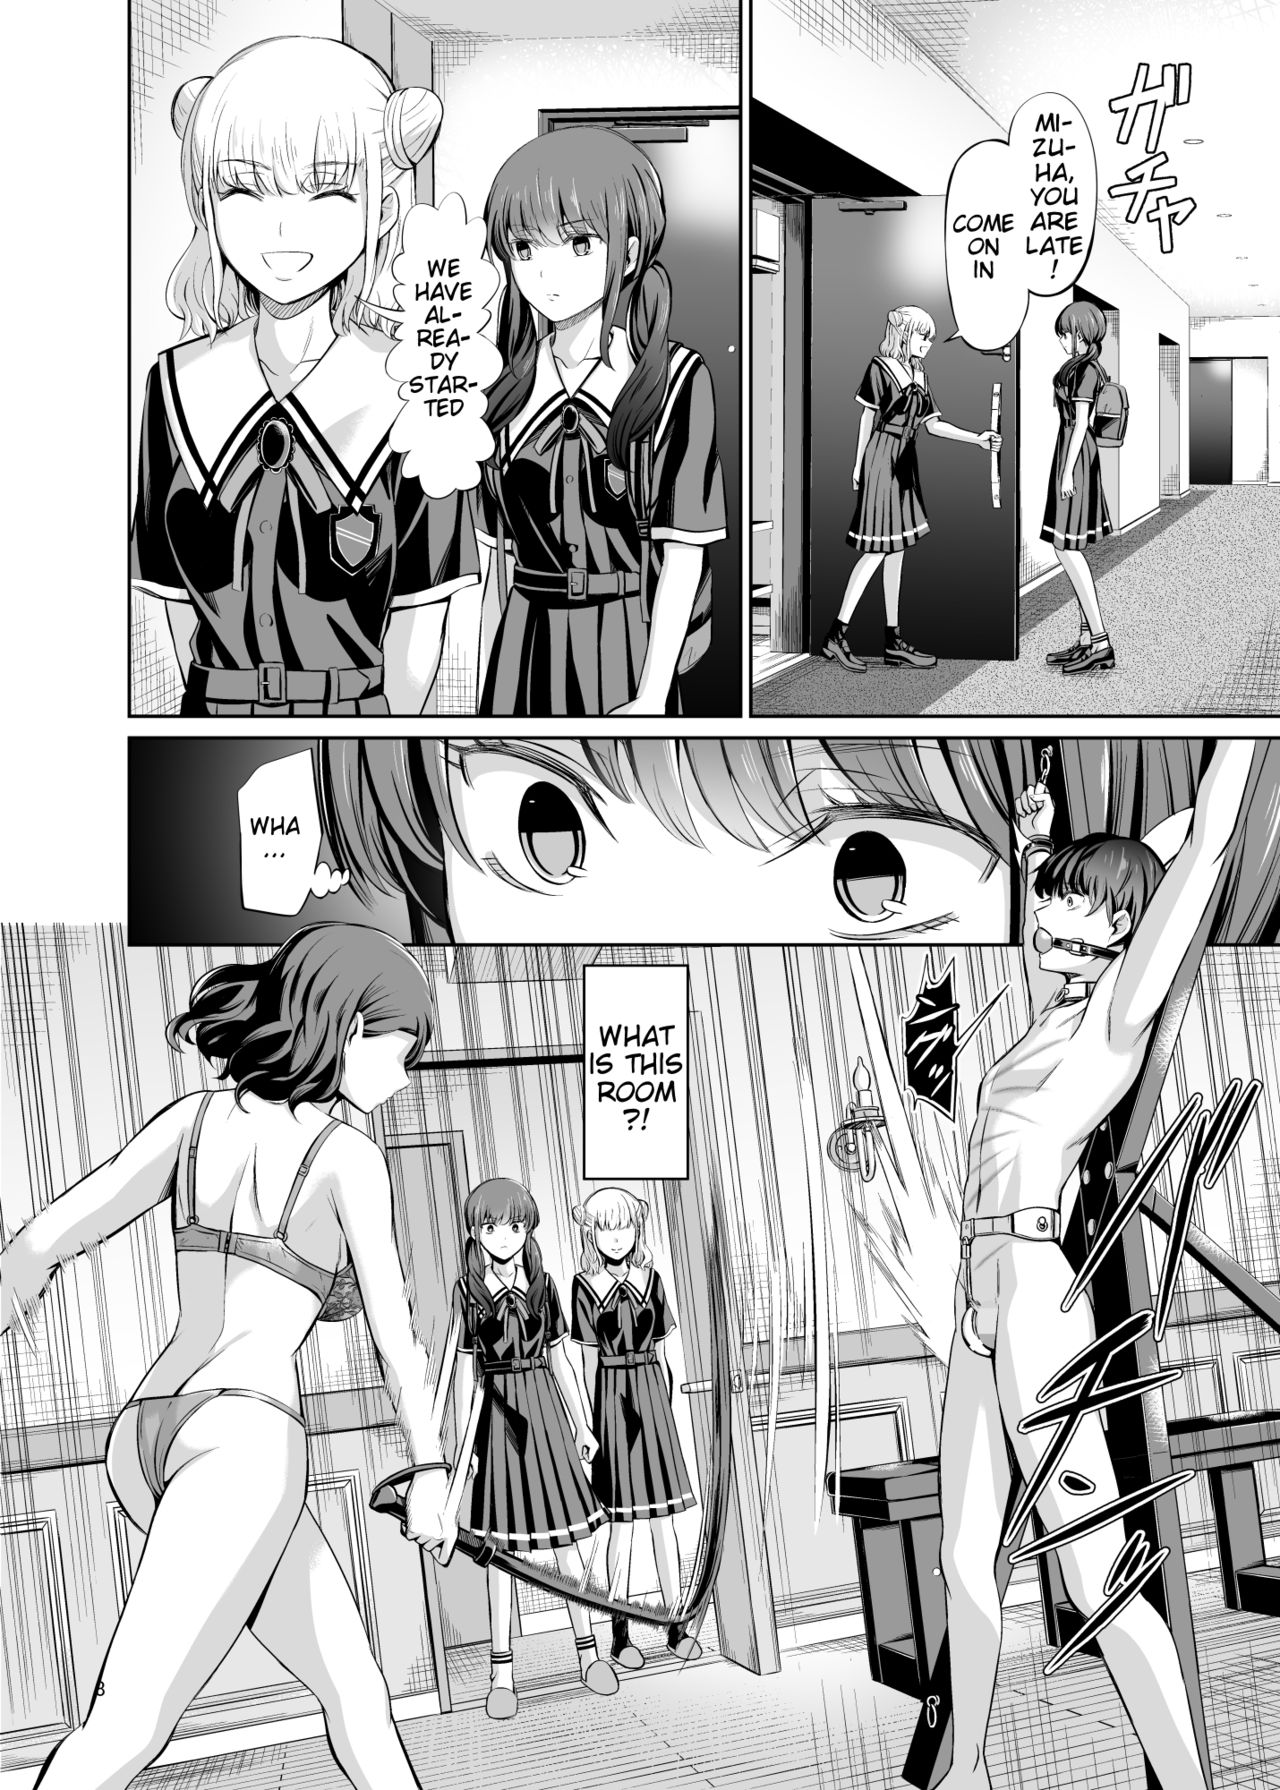 [Yamahata Rian] Tensuushugi no Kuni Kouhen | A Country Based on Point System Sequel [English] [Esoteric_Autist, klow82] page 10 full